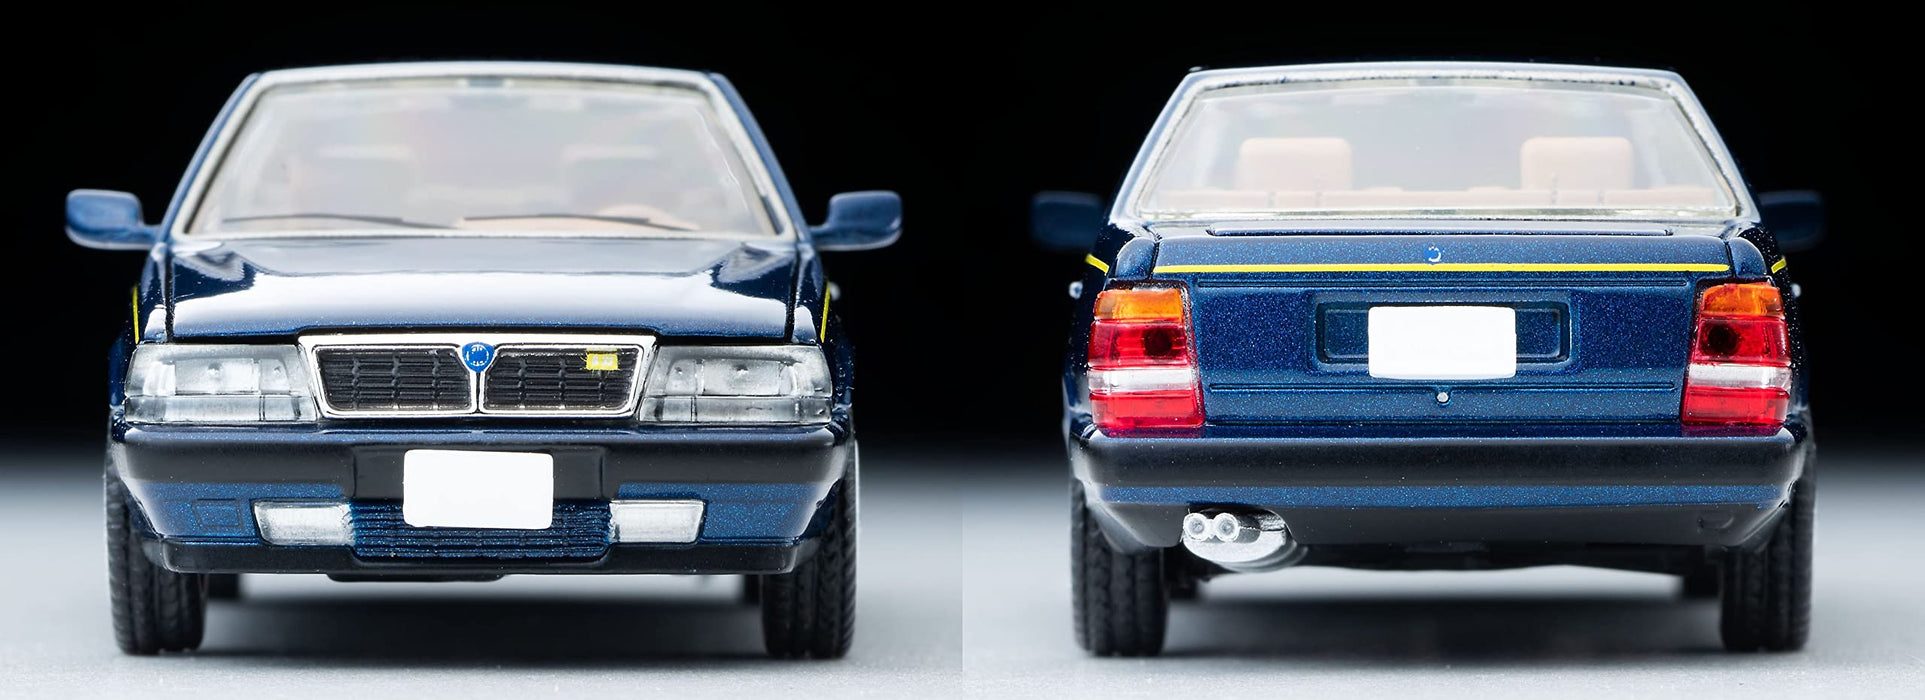 TOMICA LIMITED VINTAGE NEO 1/64 LV-N275a LANCIA THEMA 8.32 Phase II Navy 320449_4